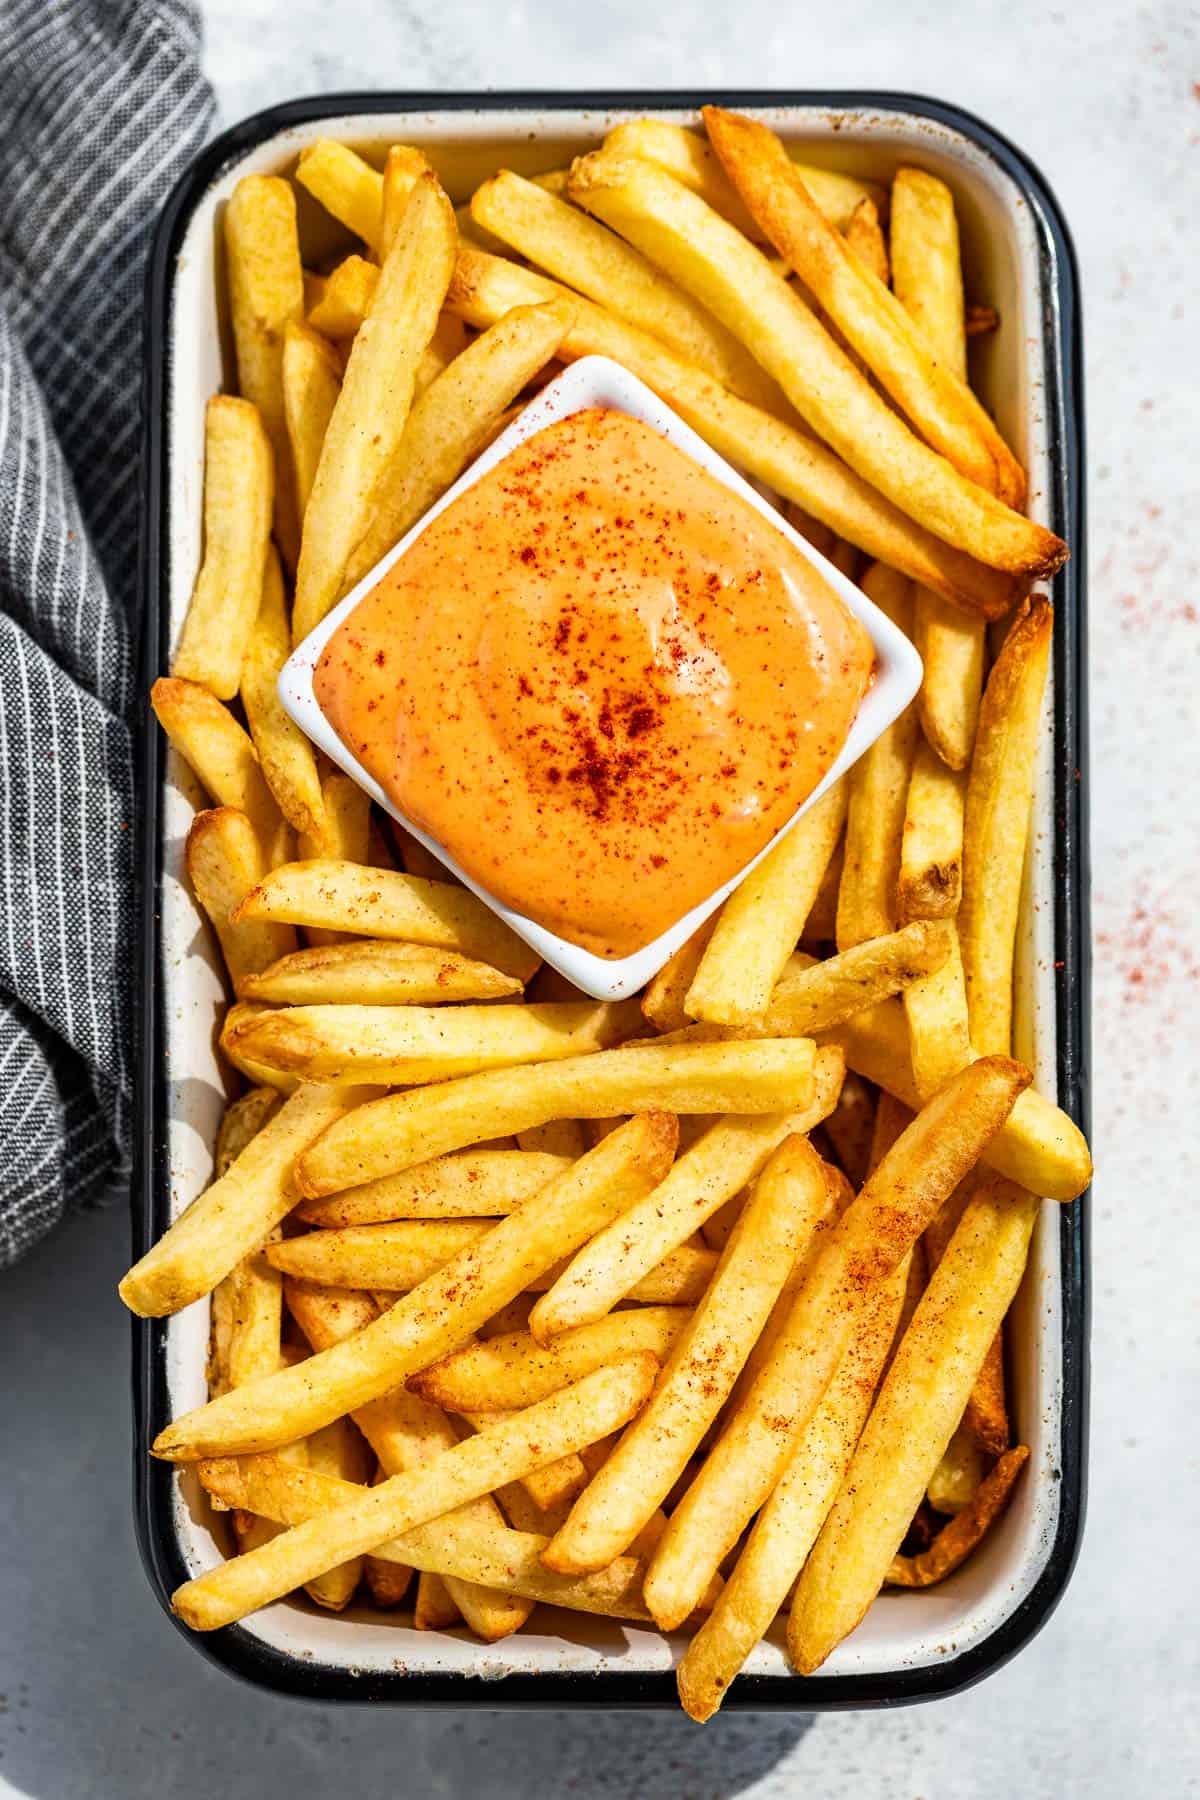 Straight down view of French fries in a rectangular container with a square dish of Chipotle Aioli in the center.